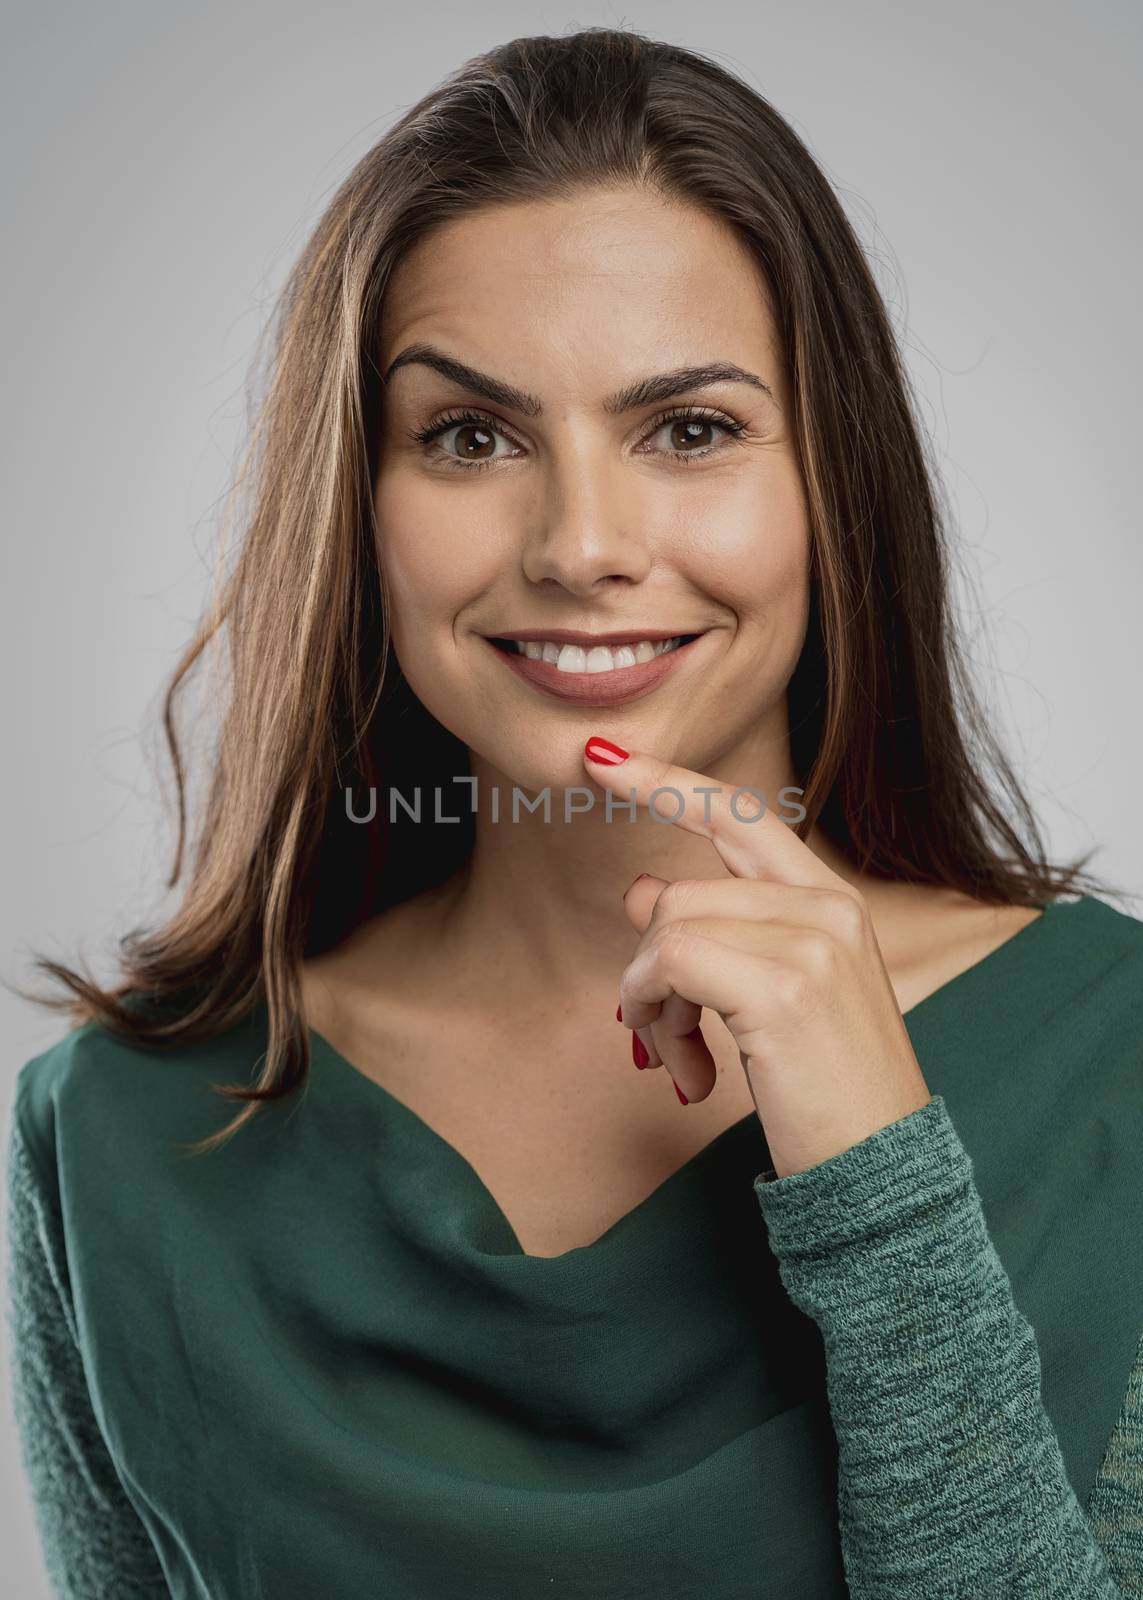 Portrait of a beautiful woman smiling and with her hand on the chin thinking on something